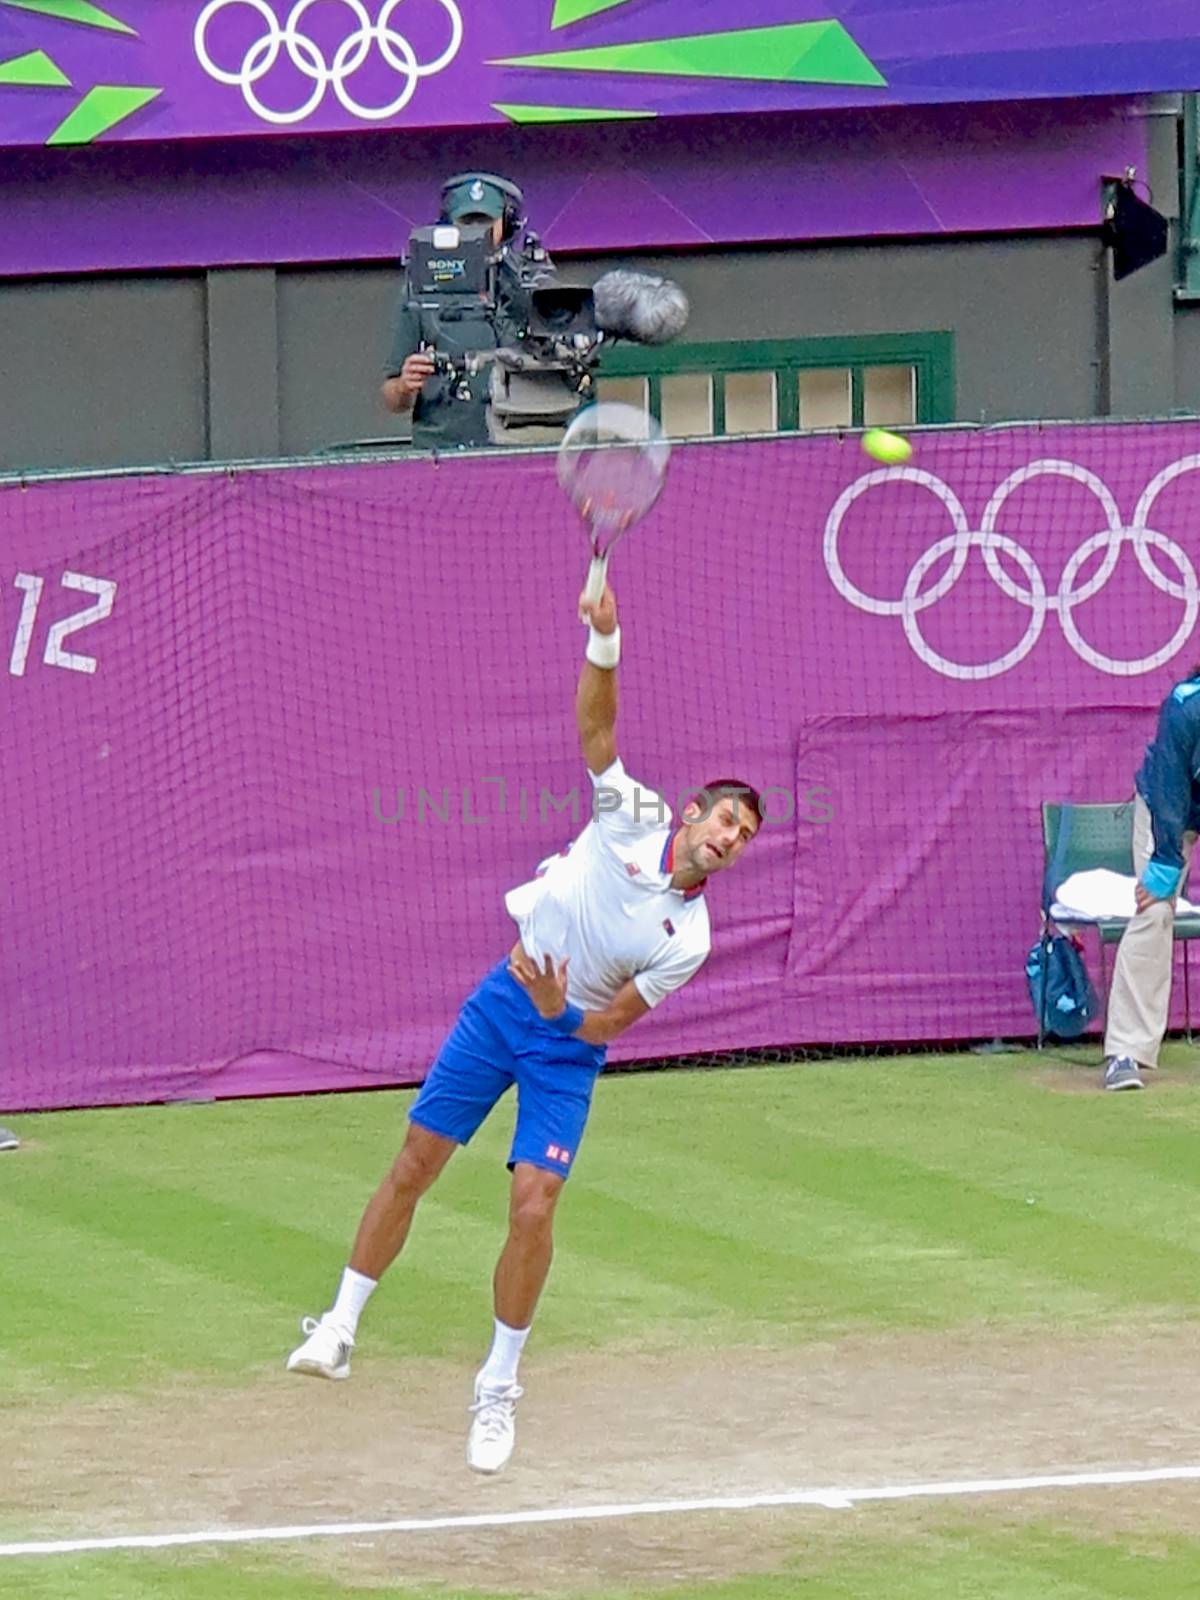 WIMBLEDON, ENGLAND - August 2nd, 2012 - Novak Djokovic during one of his singles matches at the summer Olympics in London in 2012. He took 4th place in the tournament.